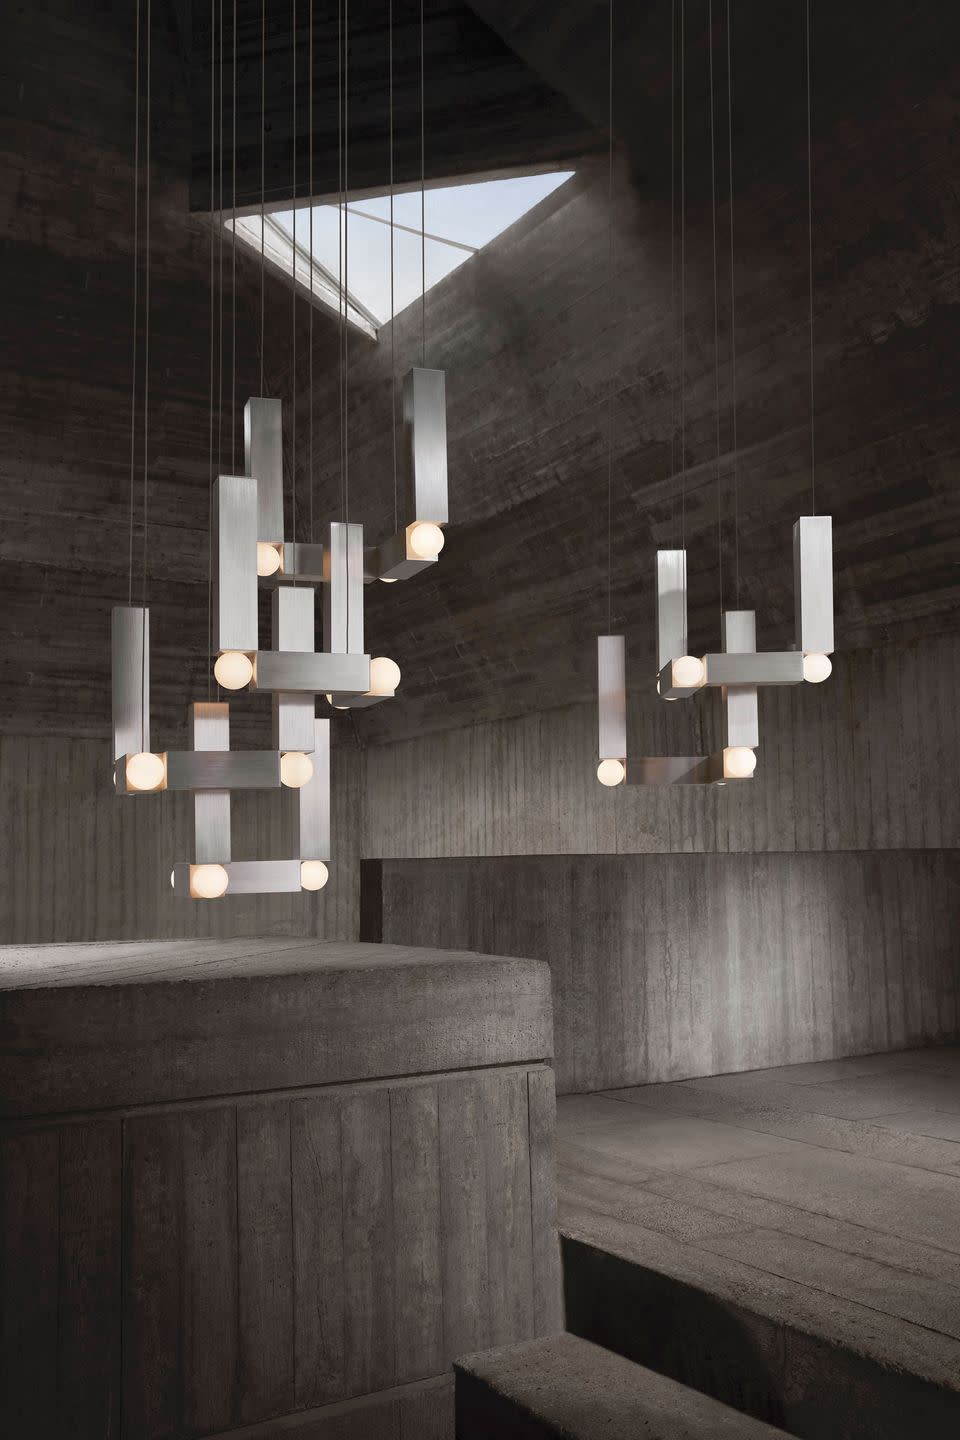 <p><strong>Who:</strong> Lee Broom</p><p><strong>What:</strong> “Divine Inspiration”</p><p><strong>Why:</strong> British lighting, furniture, and interior designer Lee Broom has designed his first lighting collection in four years for this edition of Salone, commemorating his 15th anniversary. “Divine Inspiration” is a mixture of handmade and ready-made lighting fixtures and sculptures that takes inspiration from Broom’s surroundings as a child, growing up around Brutalist architecture. He melds this view with the notion of religious lighting—specifically the way cathedrals are lit. The Vesper Light (pictured here) is made of extruded aluminum and combines the austerity of Brutalism with the modernism of cathedral lighting, resulting in a simple yet mystical piece that will undoubtedly stand the test of time and trends.</p>